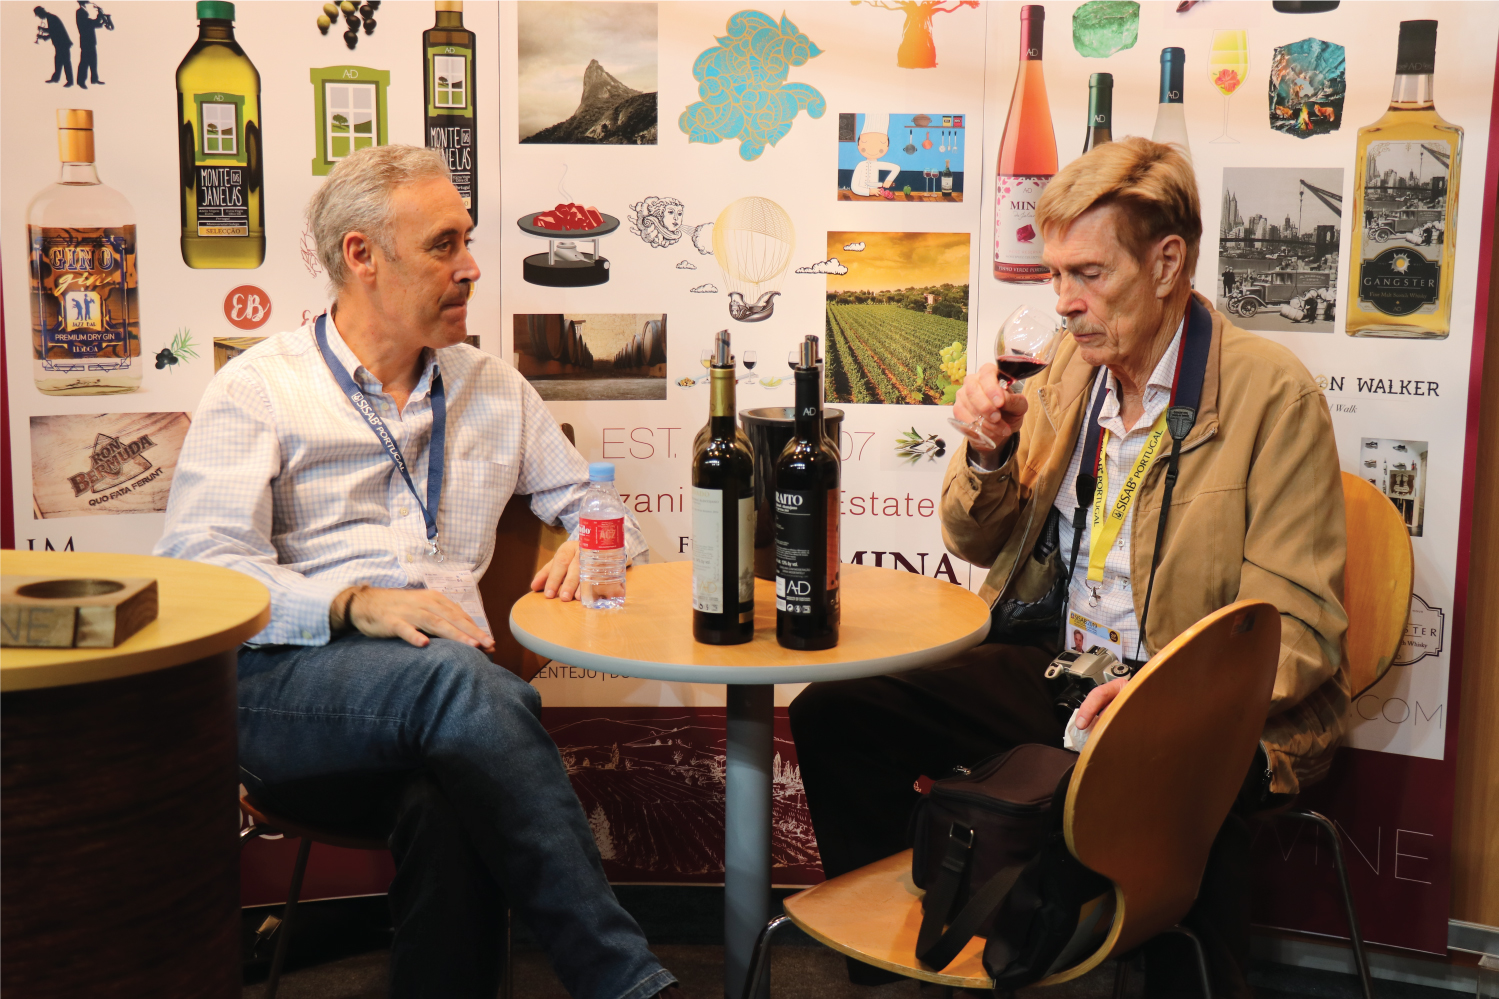 Luis Rodrigues & a wine importer at SISAB, Lisbon